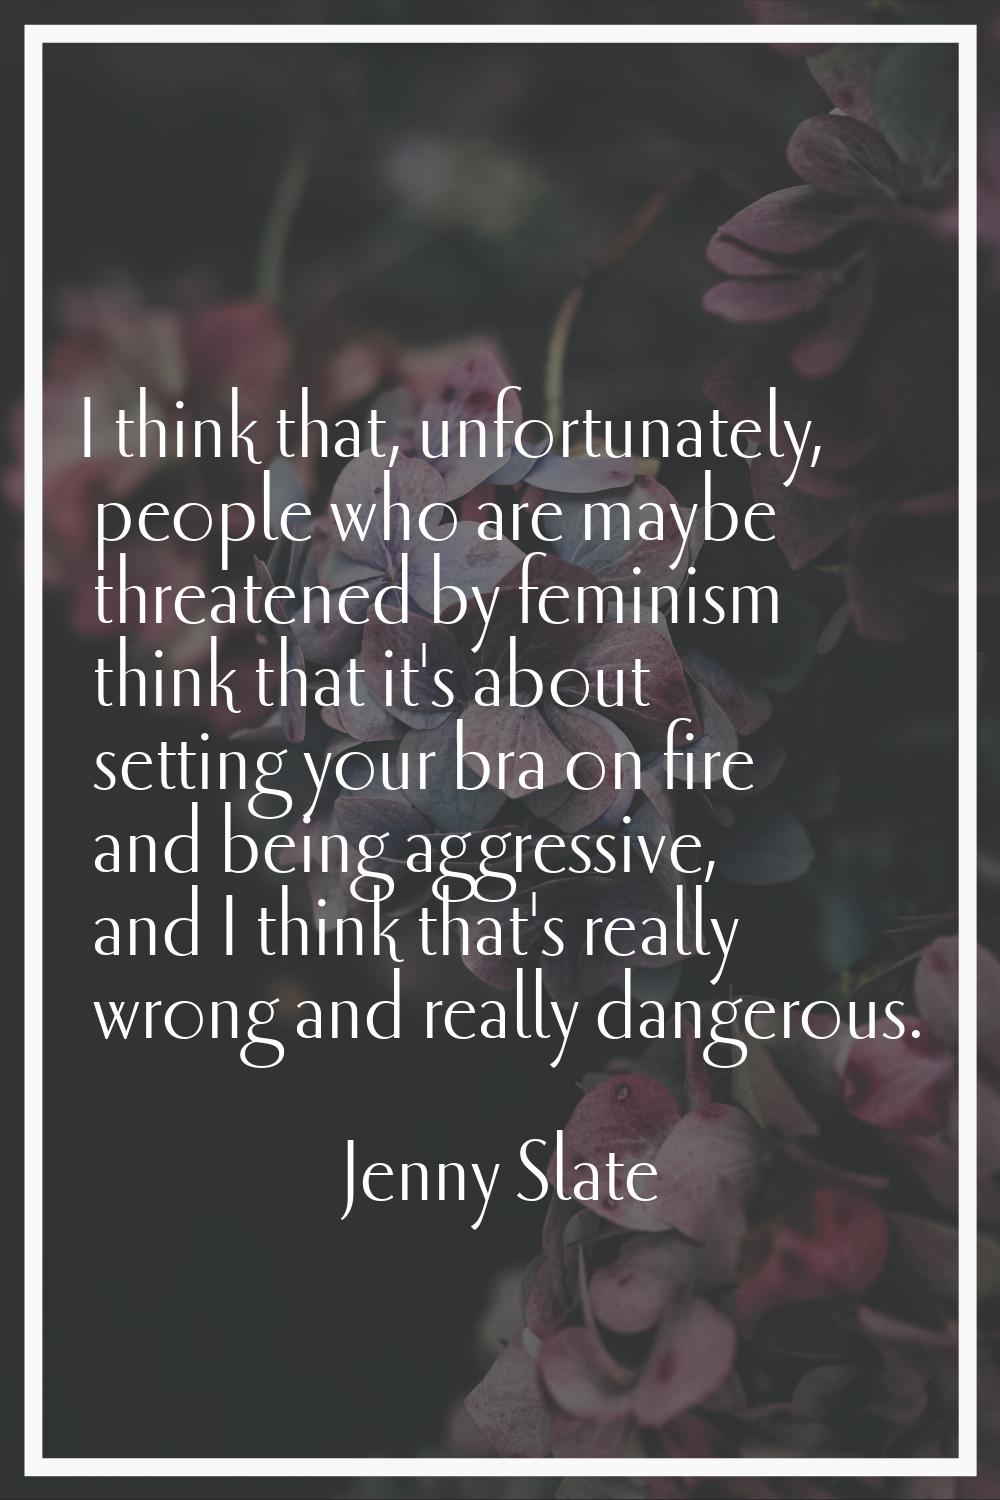 I think that, unfortunately, people who are maybe threatened by feminism think that it's about sett